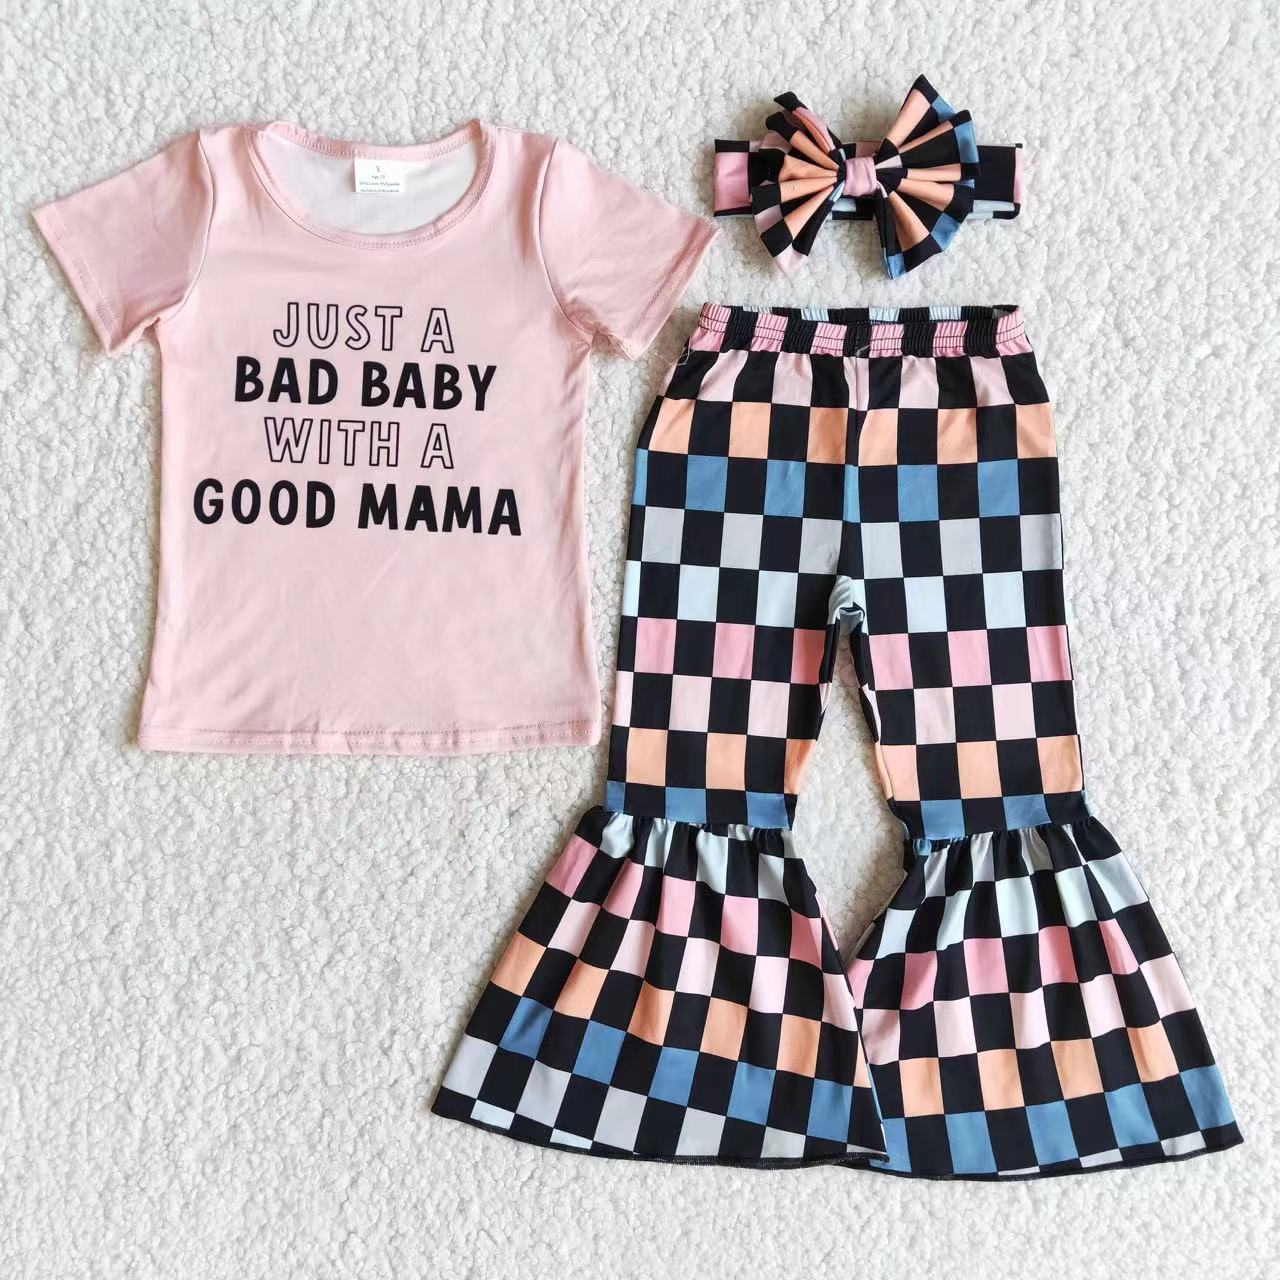 Just a bad baby with a good mama set